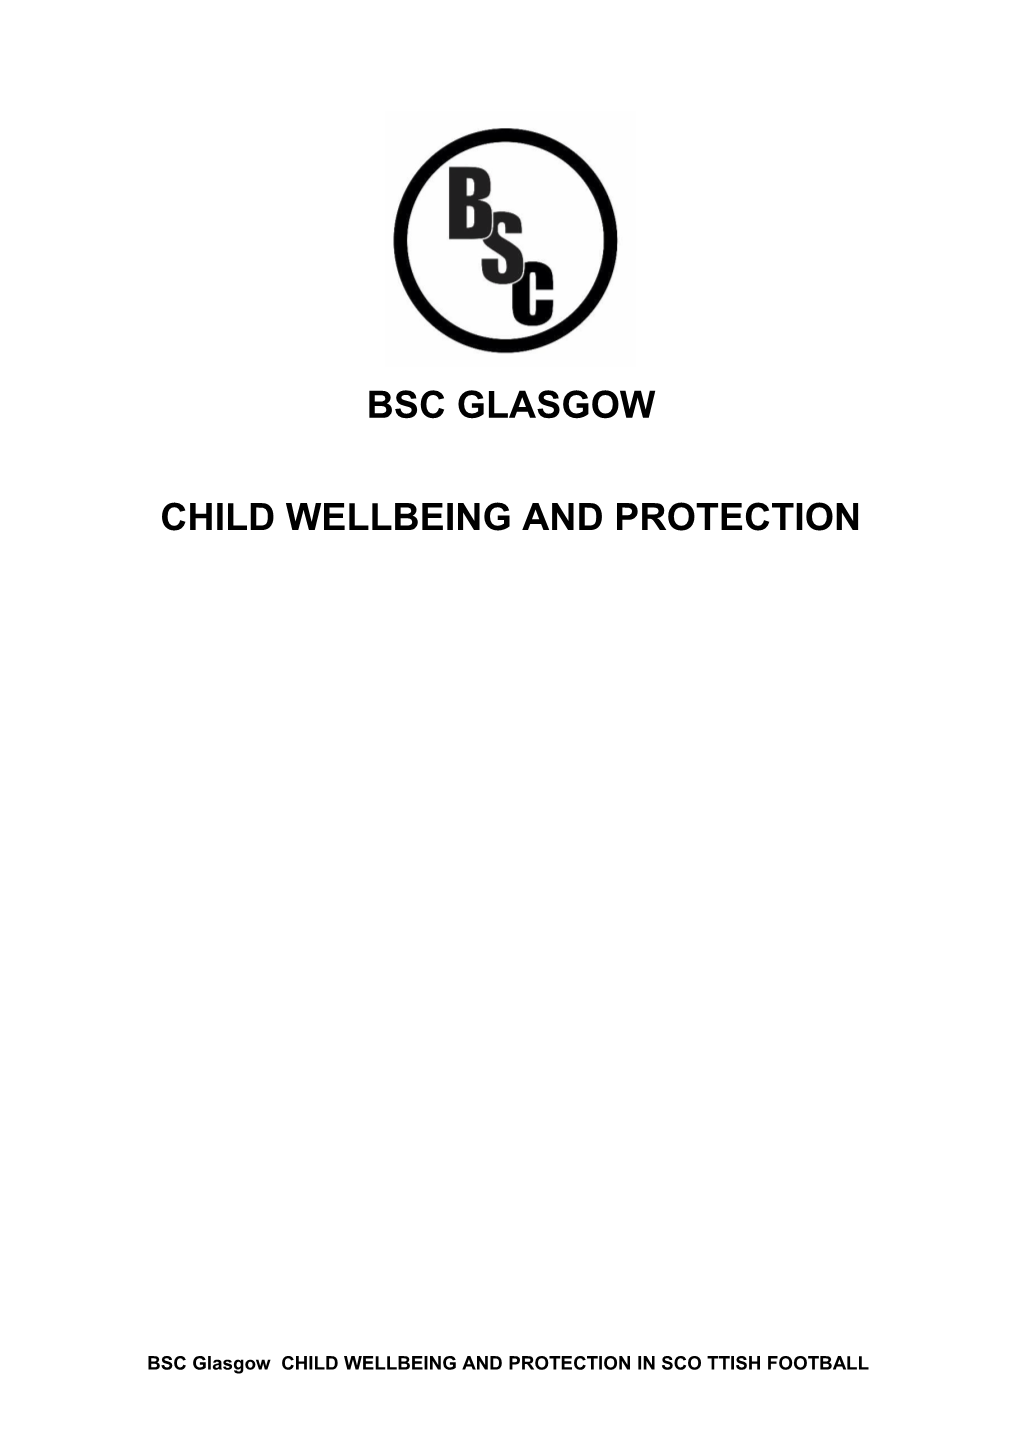 Child Wellbeing and Protection